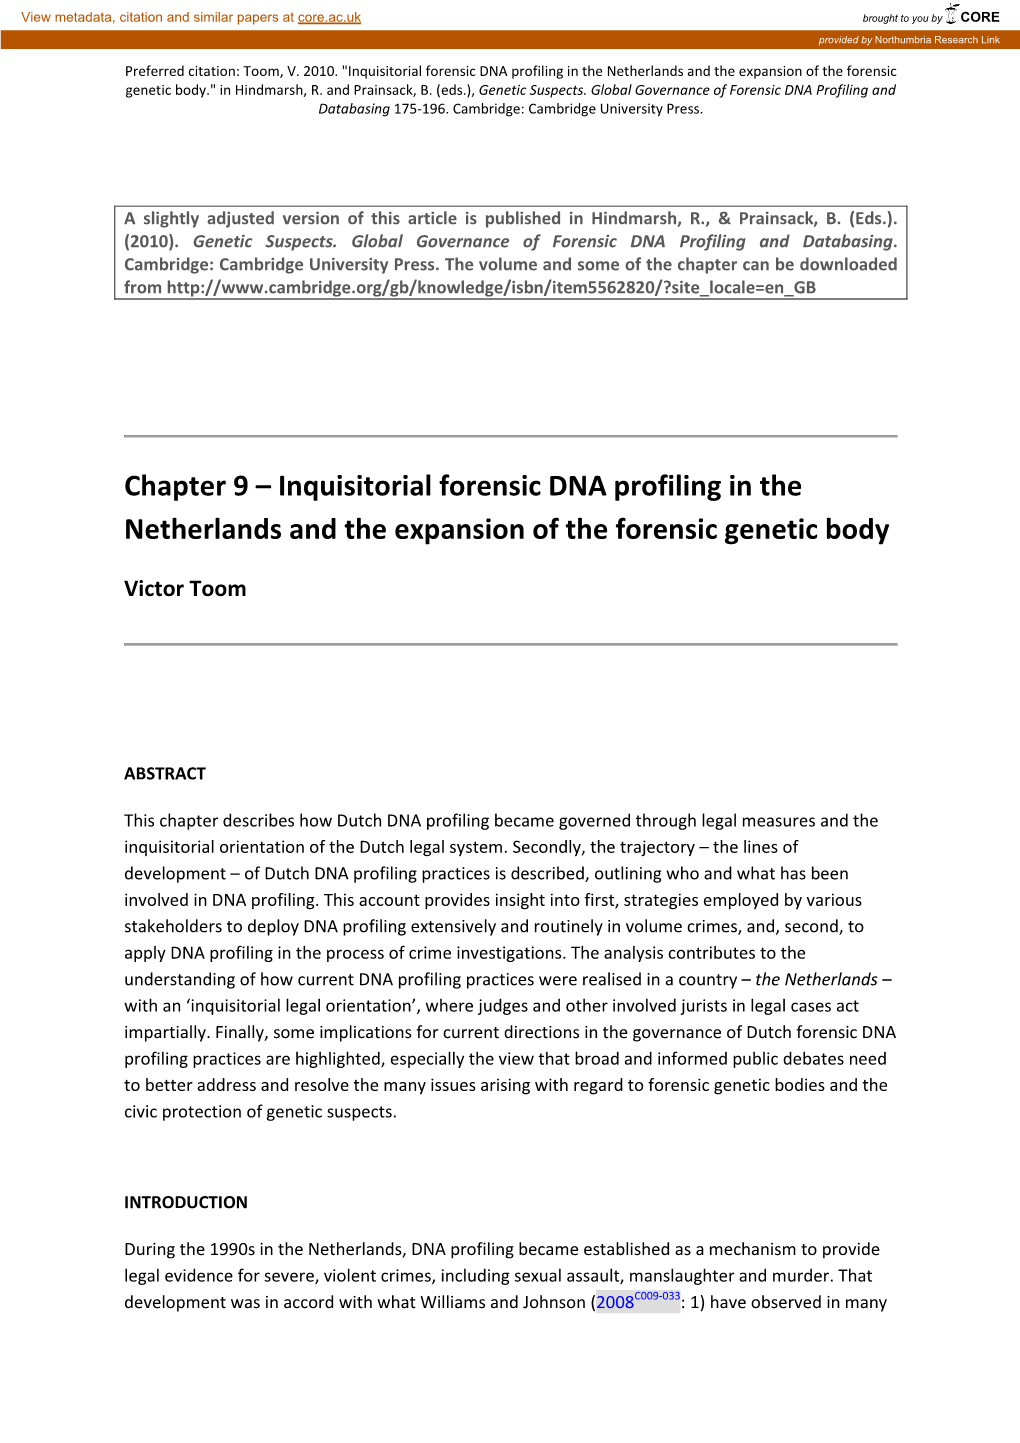 Inquisitorial Forensic DNA Profiling in the Netherlands and the Expansion of the Forensic Genetic Body." in Hindmarsh, R